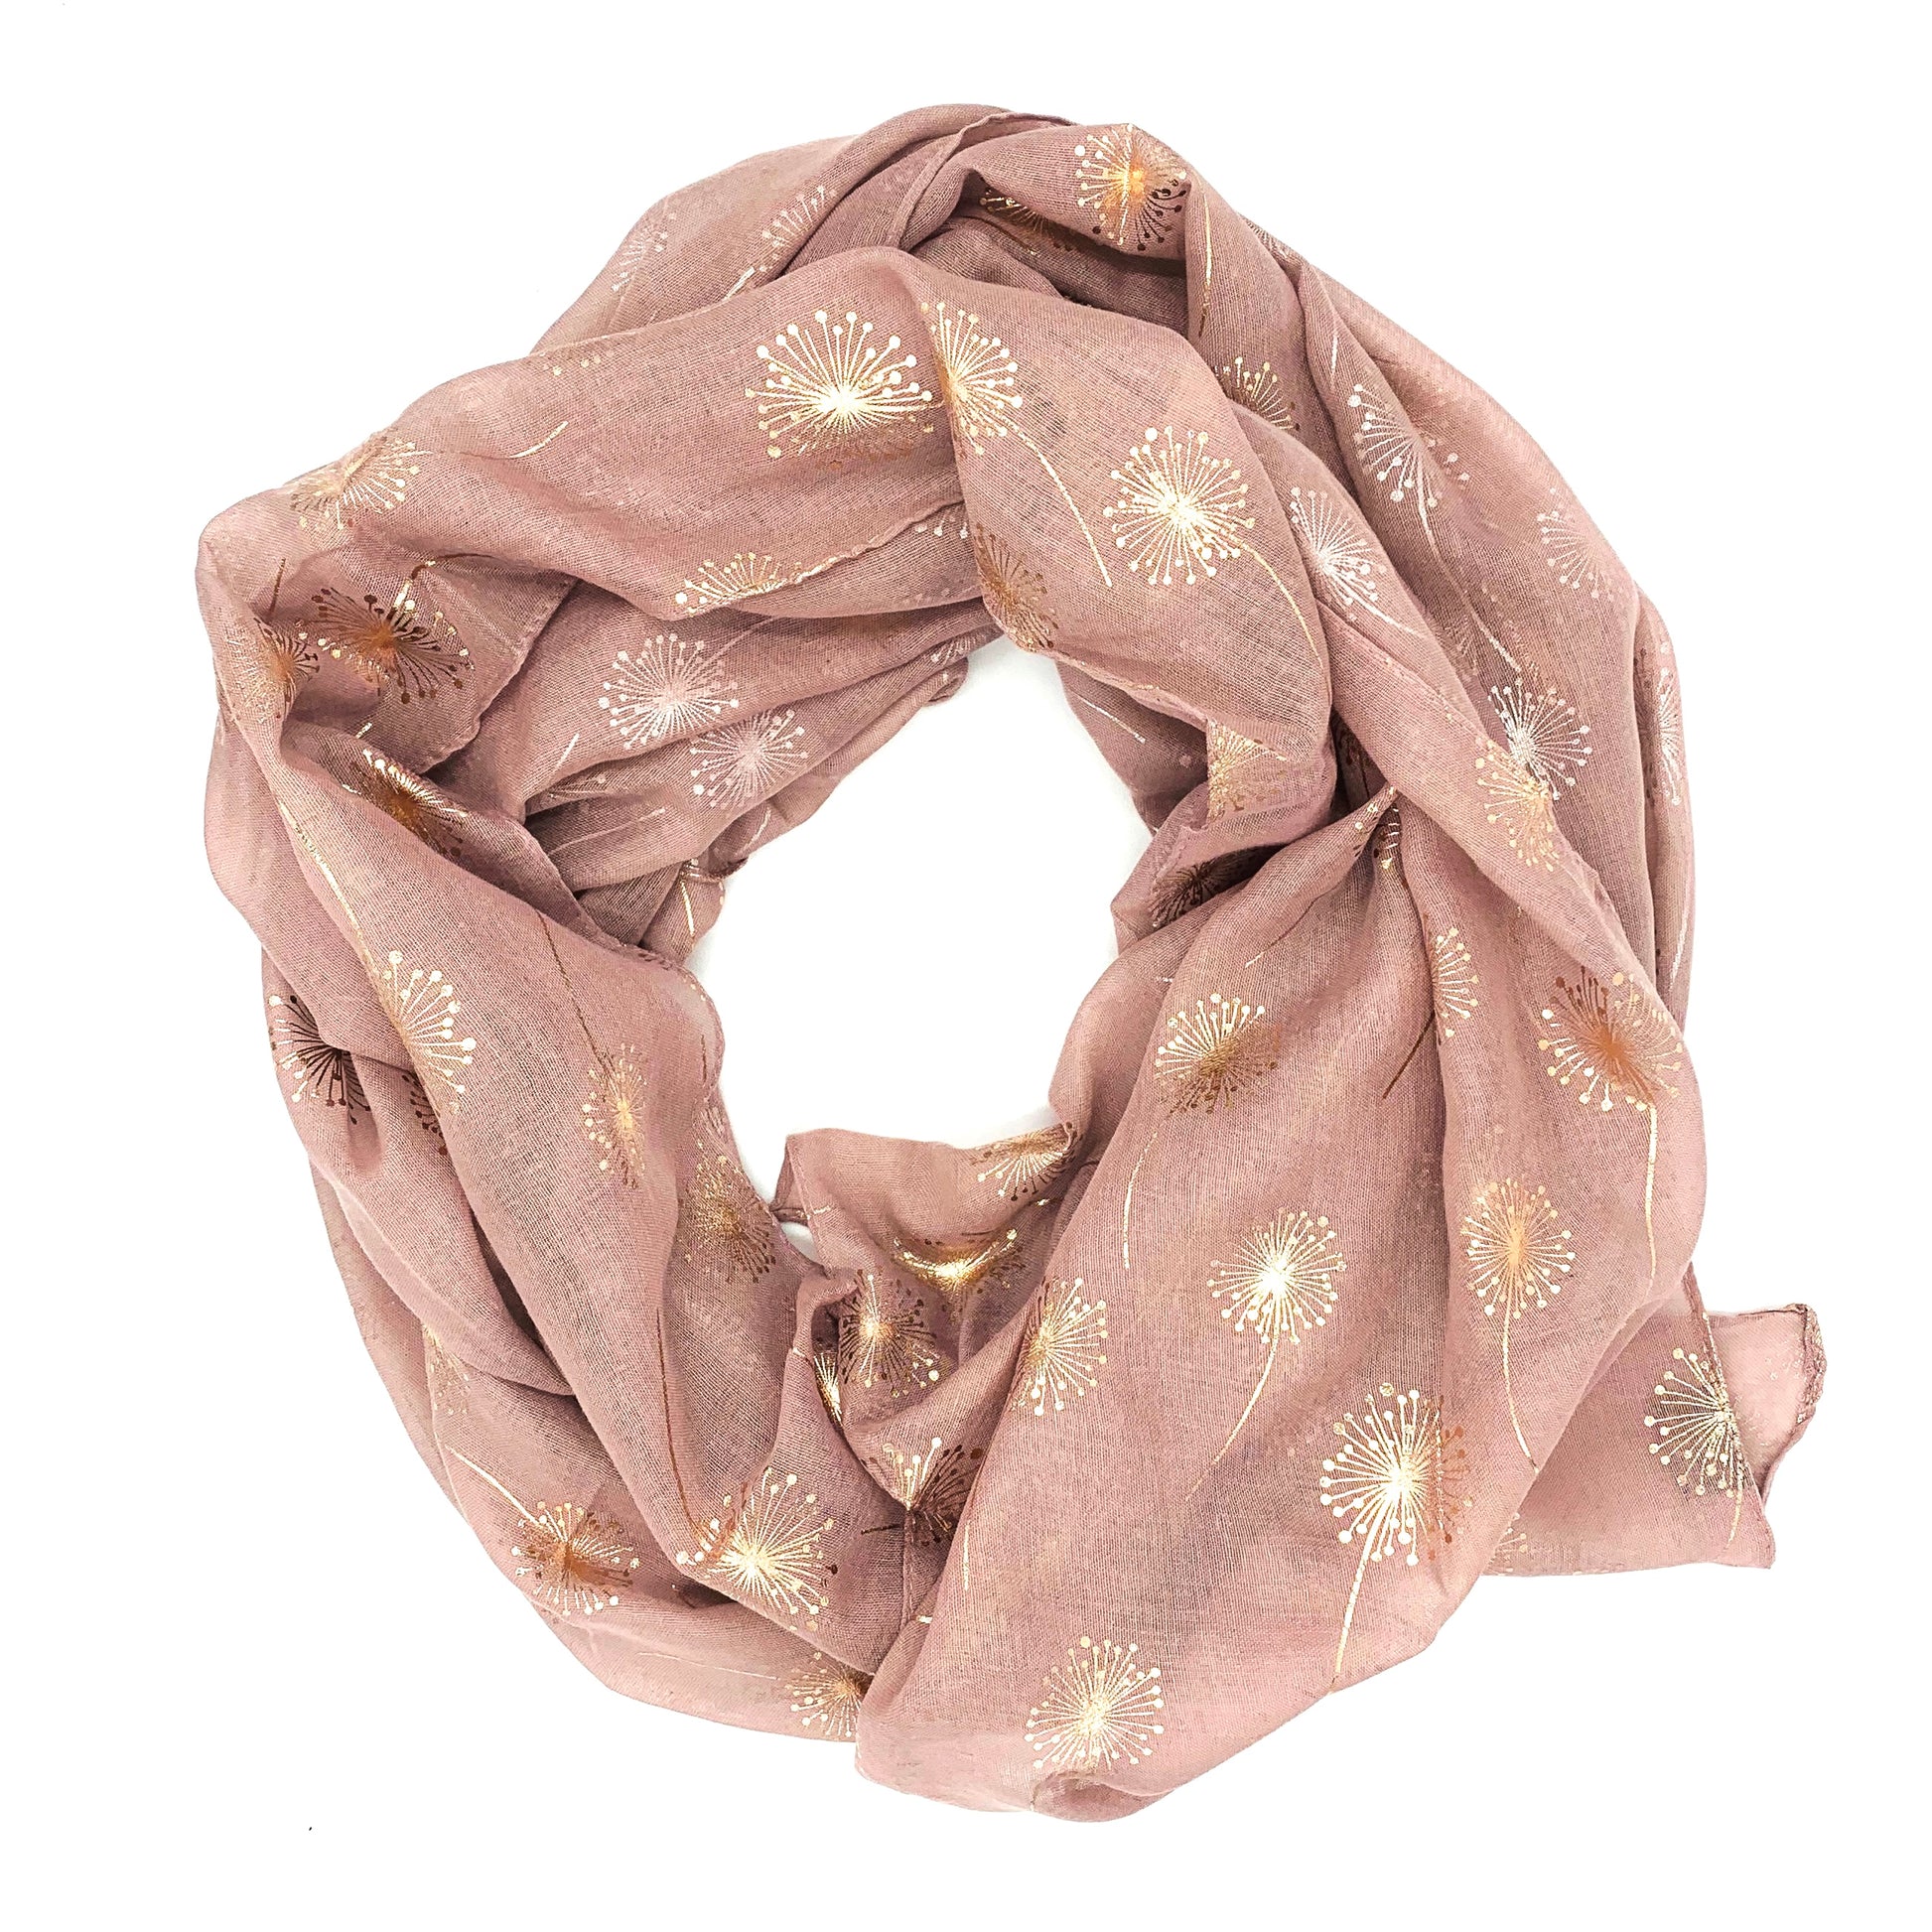 Blush pink and rose gold dandelion scarf on white background